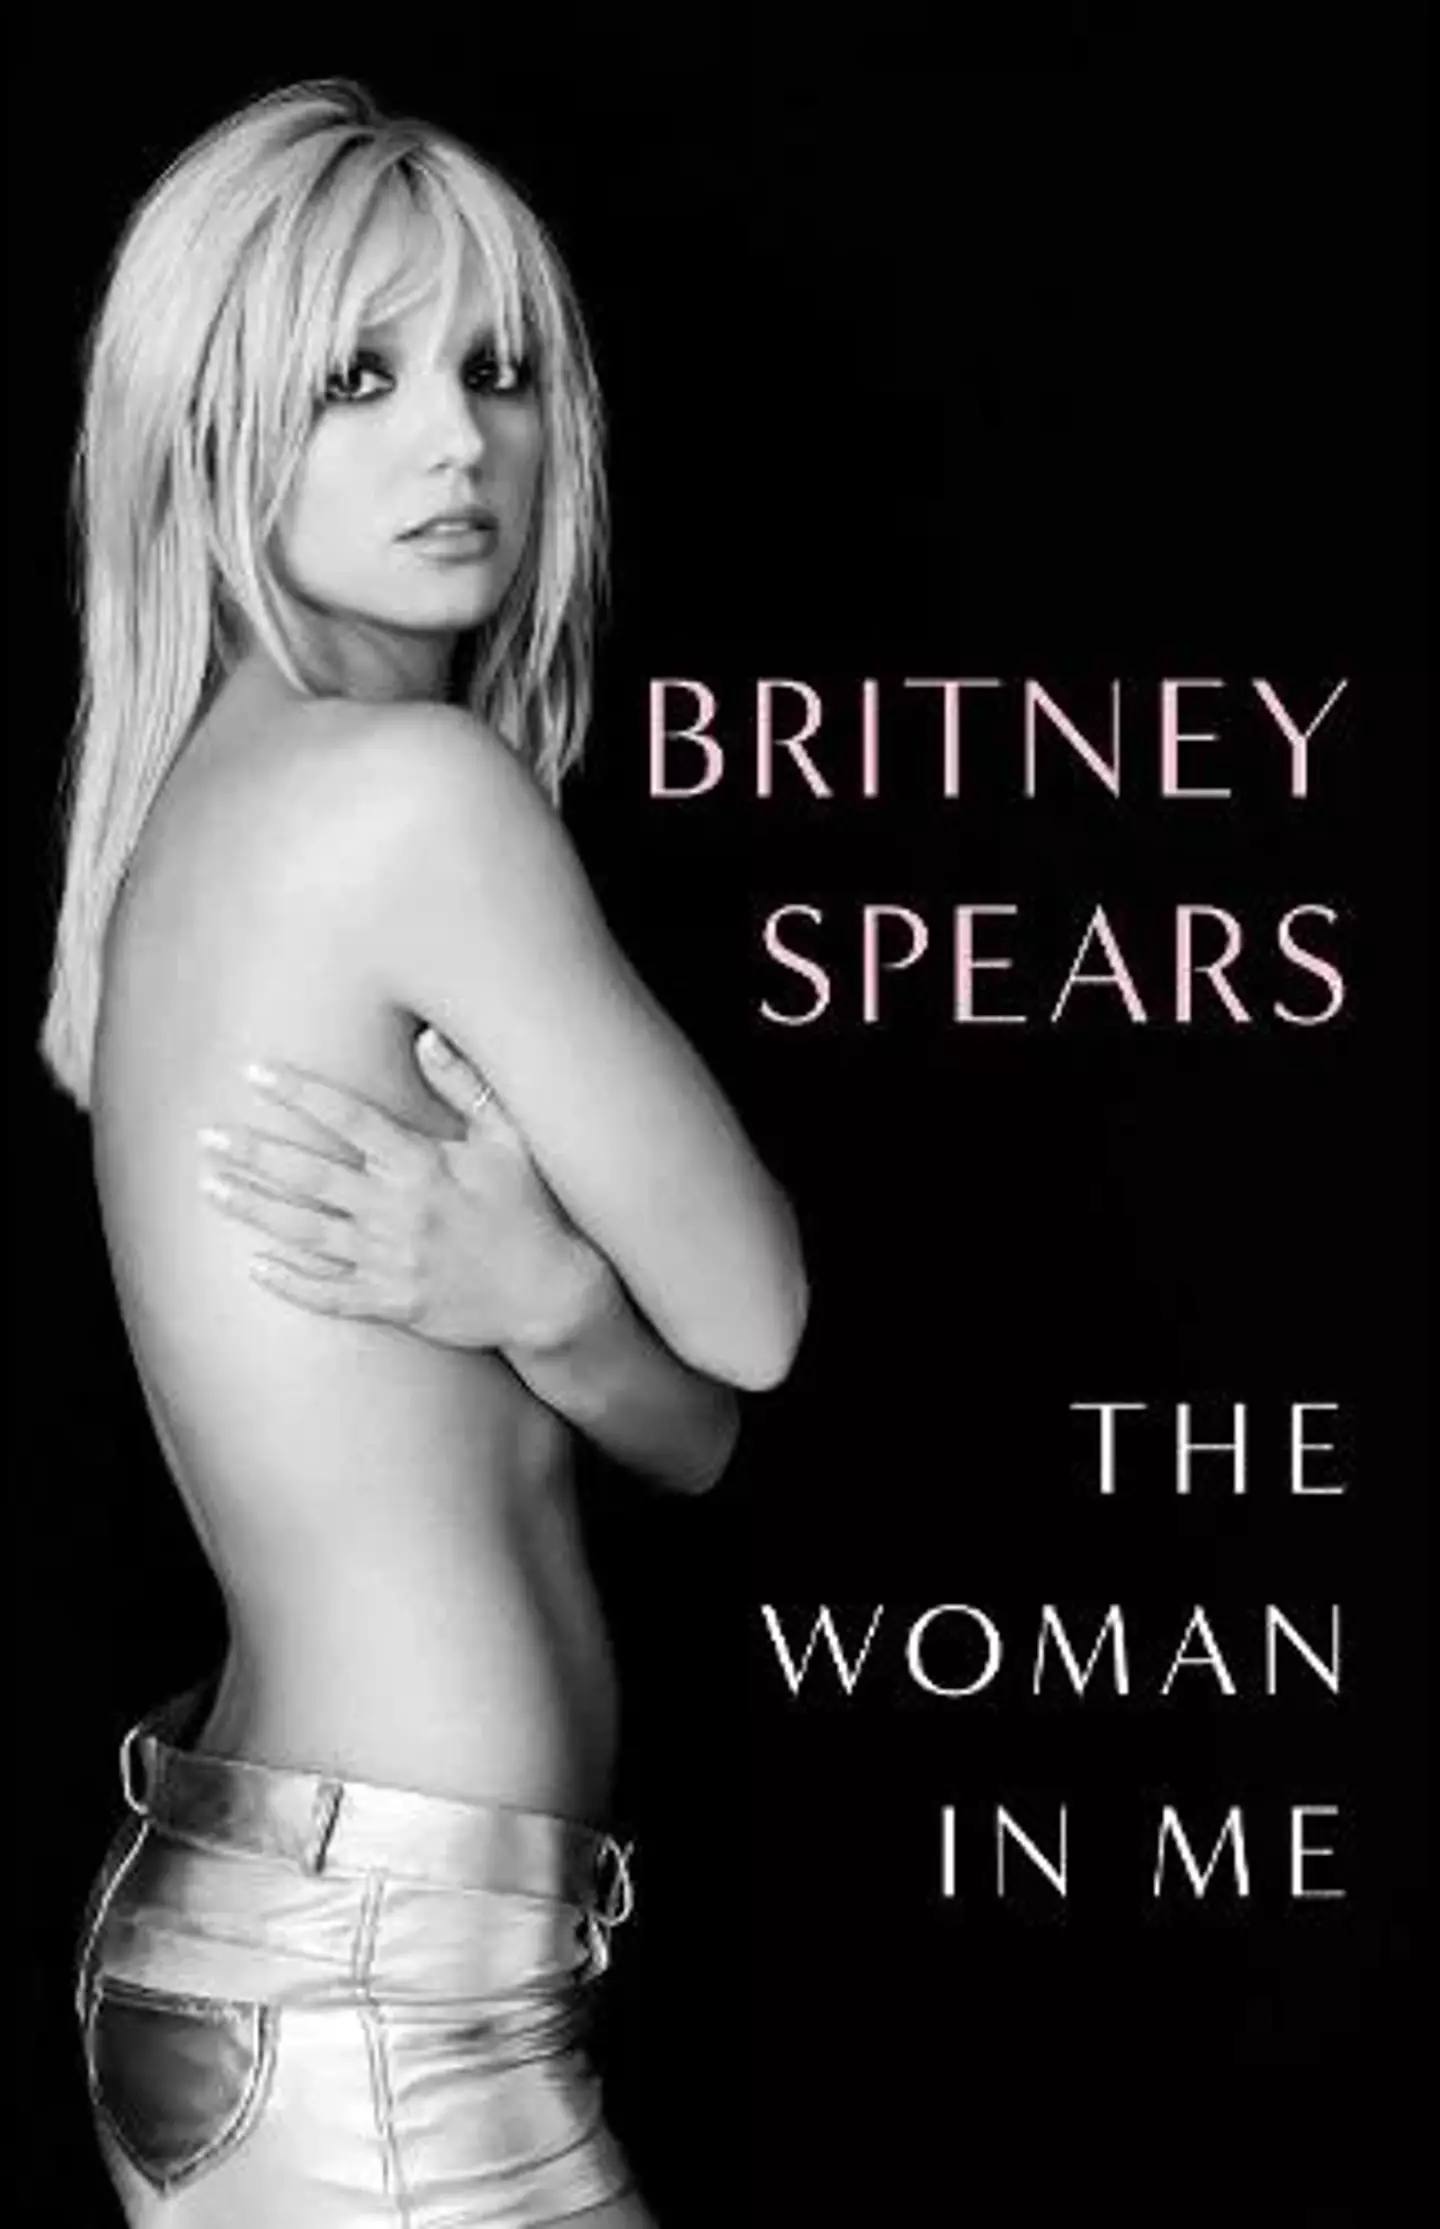 Britney Spears will publish her memoir later this month.